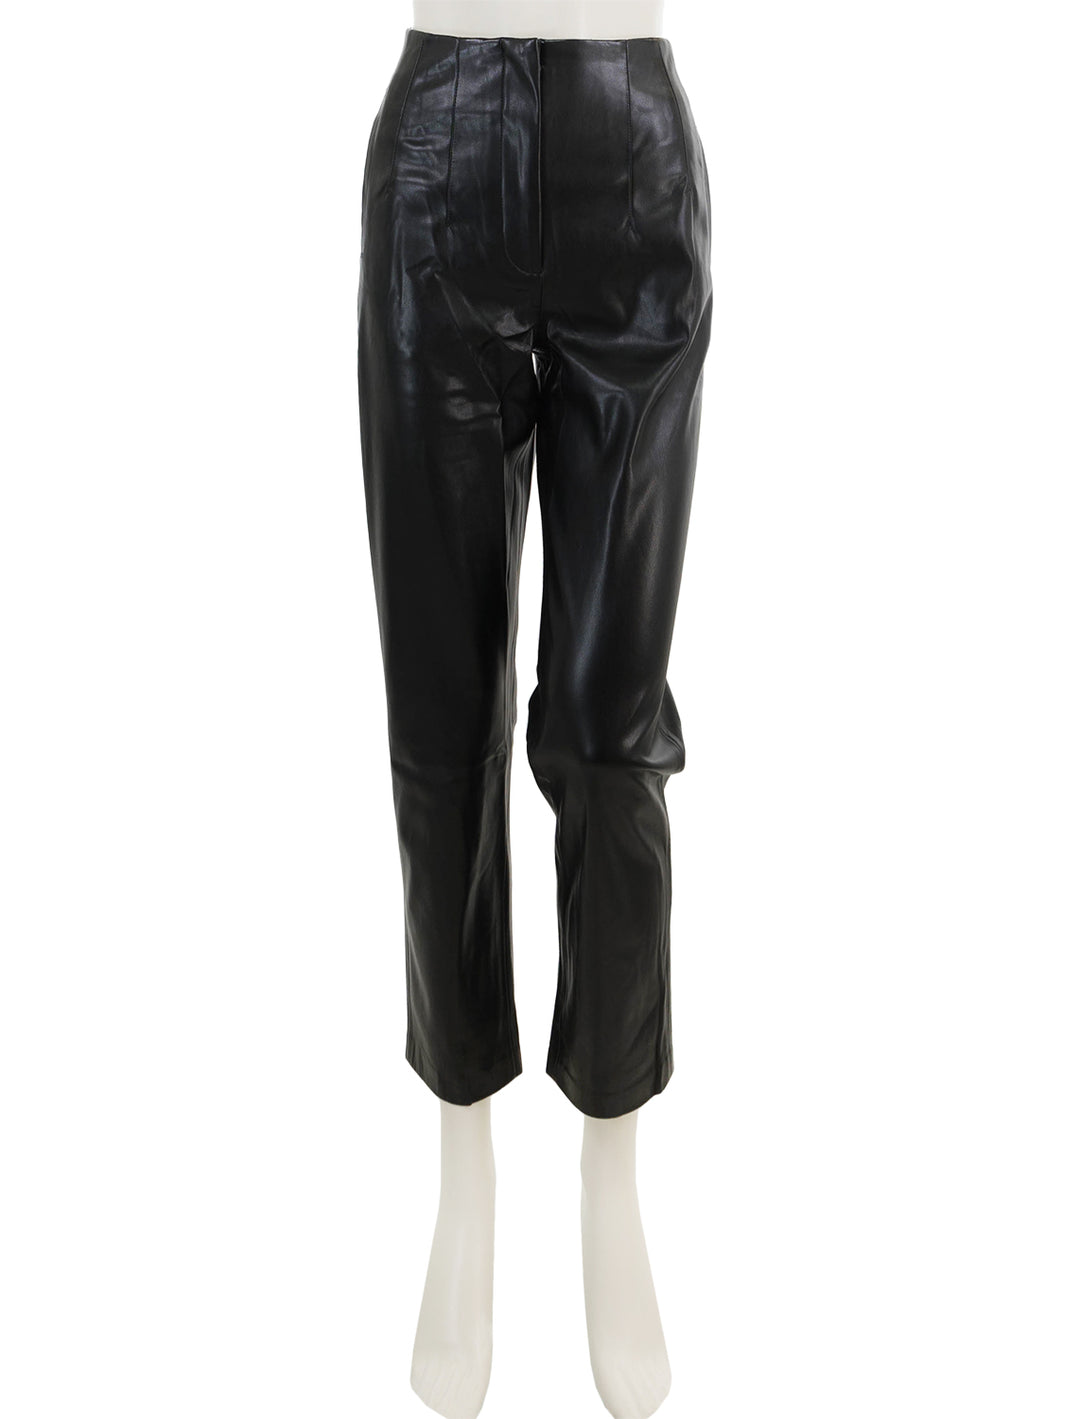 Front view of Sundays NYC's keaton pants in black.